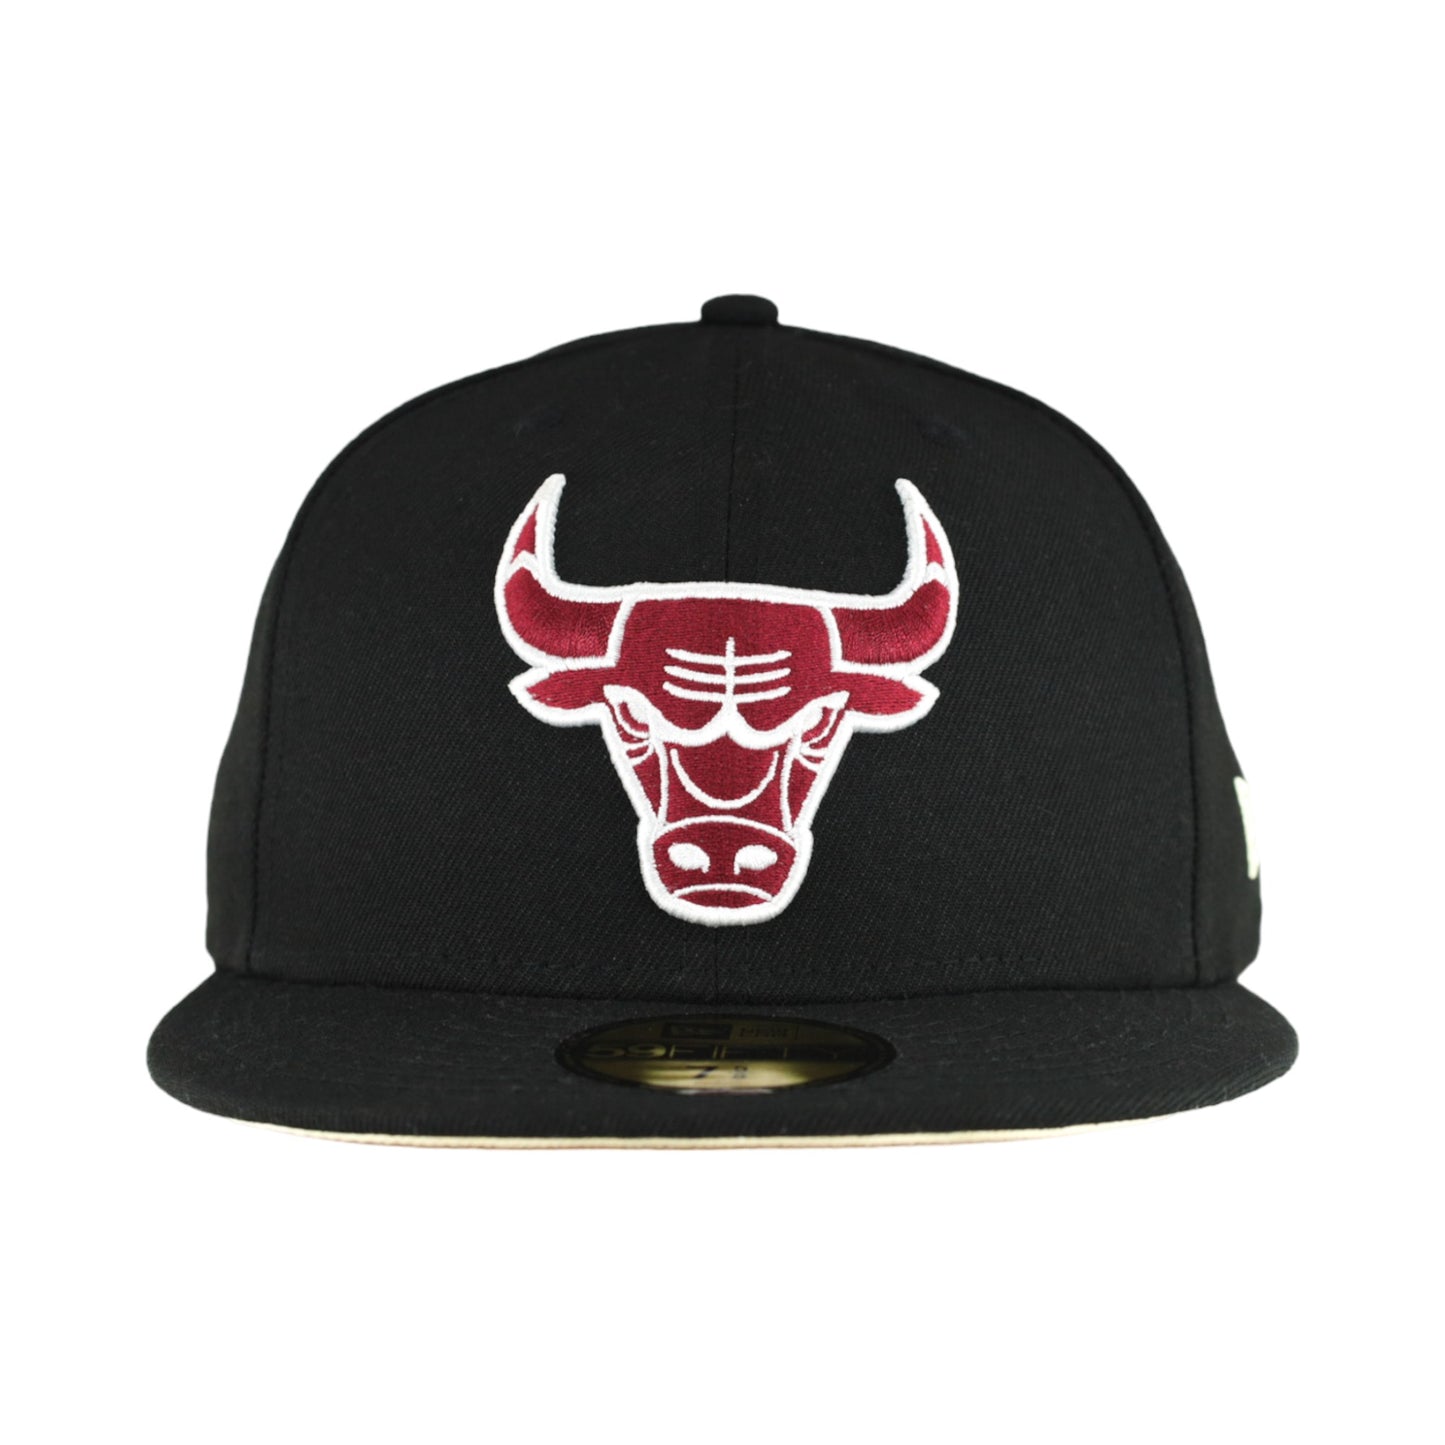 Chicago Bulls Black/Maroon New Era 59FIFTY Fitted Hat